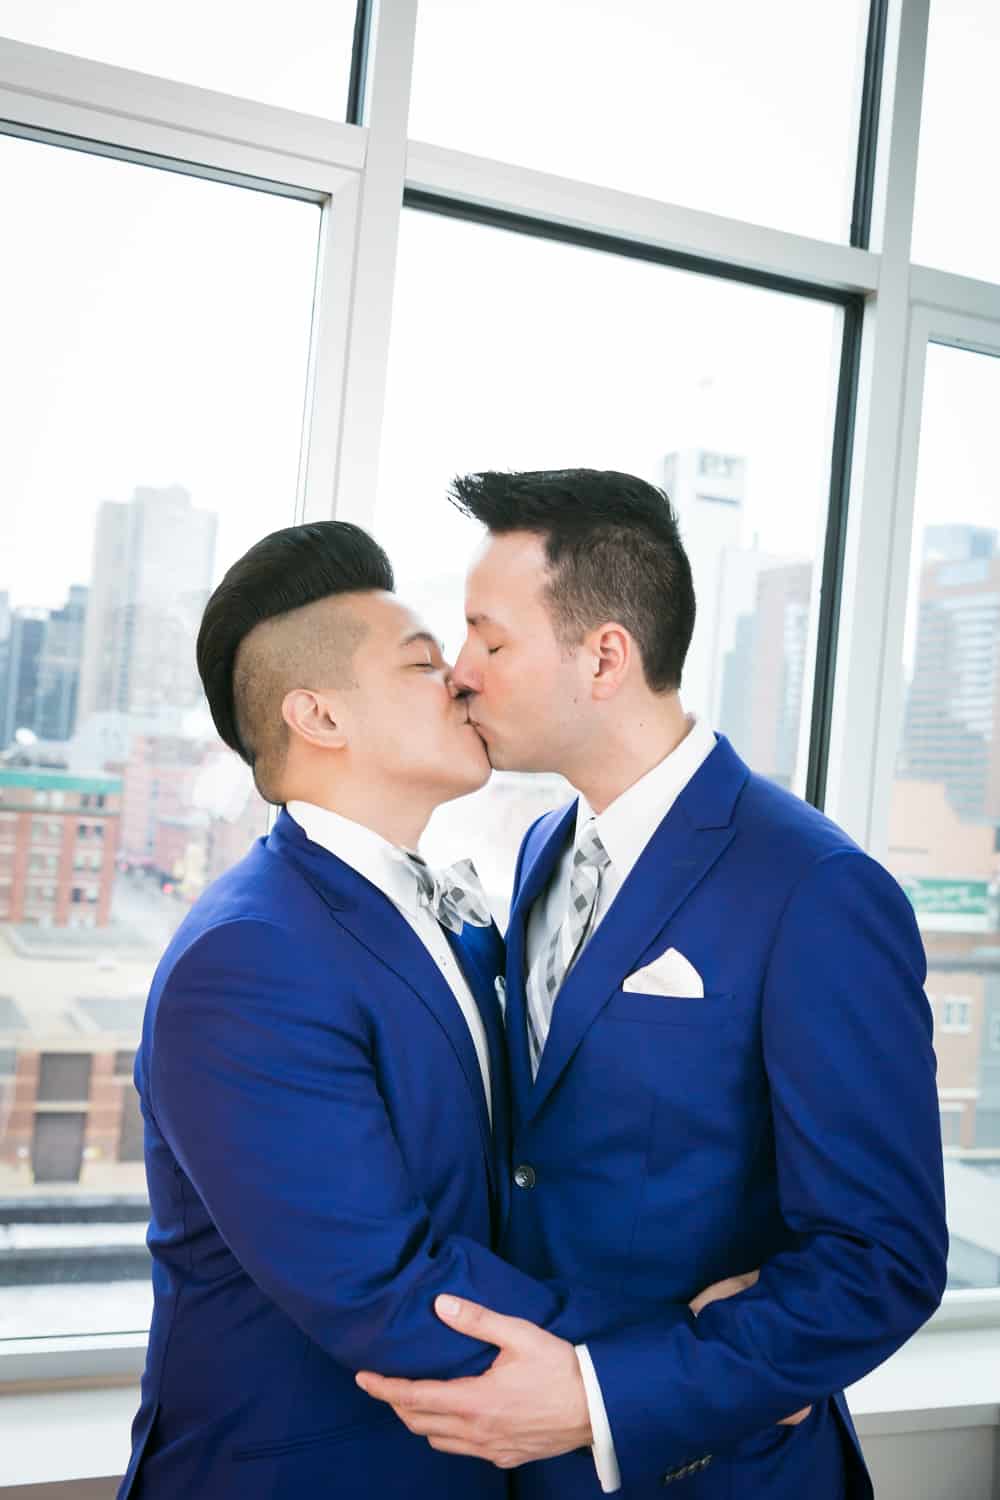 Two grooms kissing in front of window